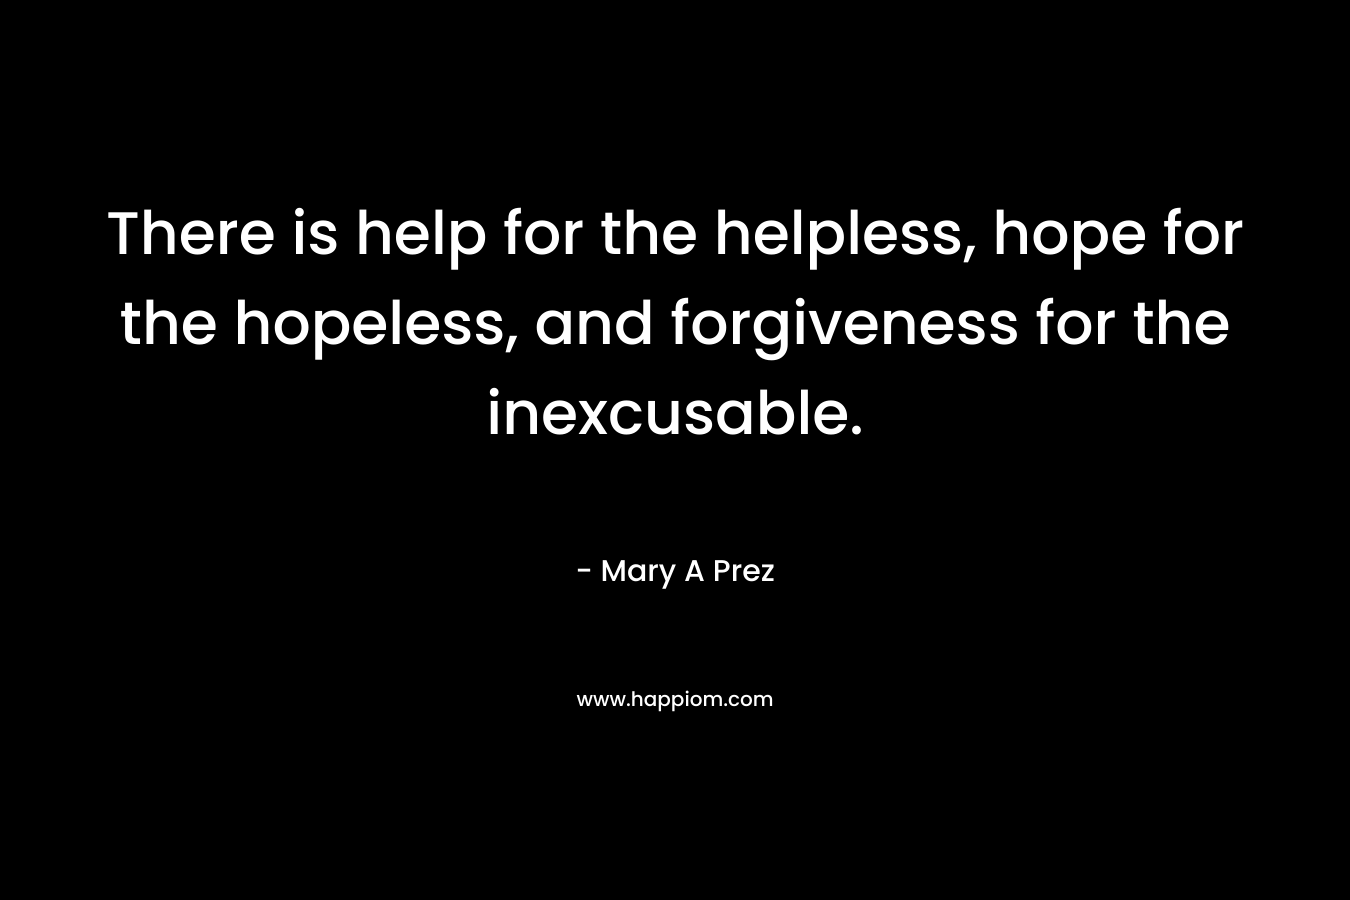 There is help for the helpless, hope for the hopeless, and forgiveness for the inexcusable.